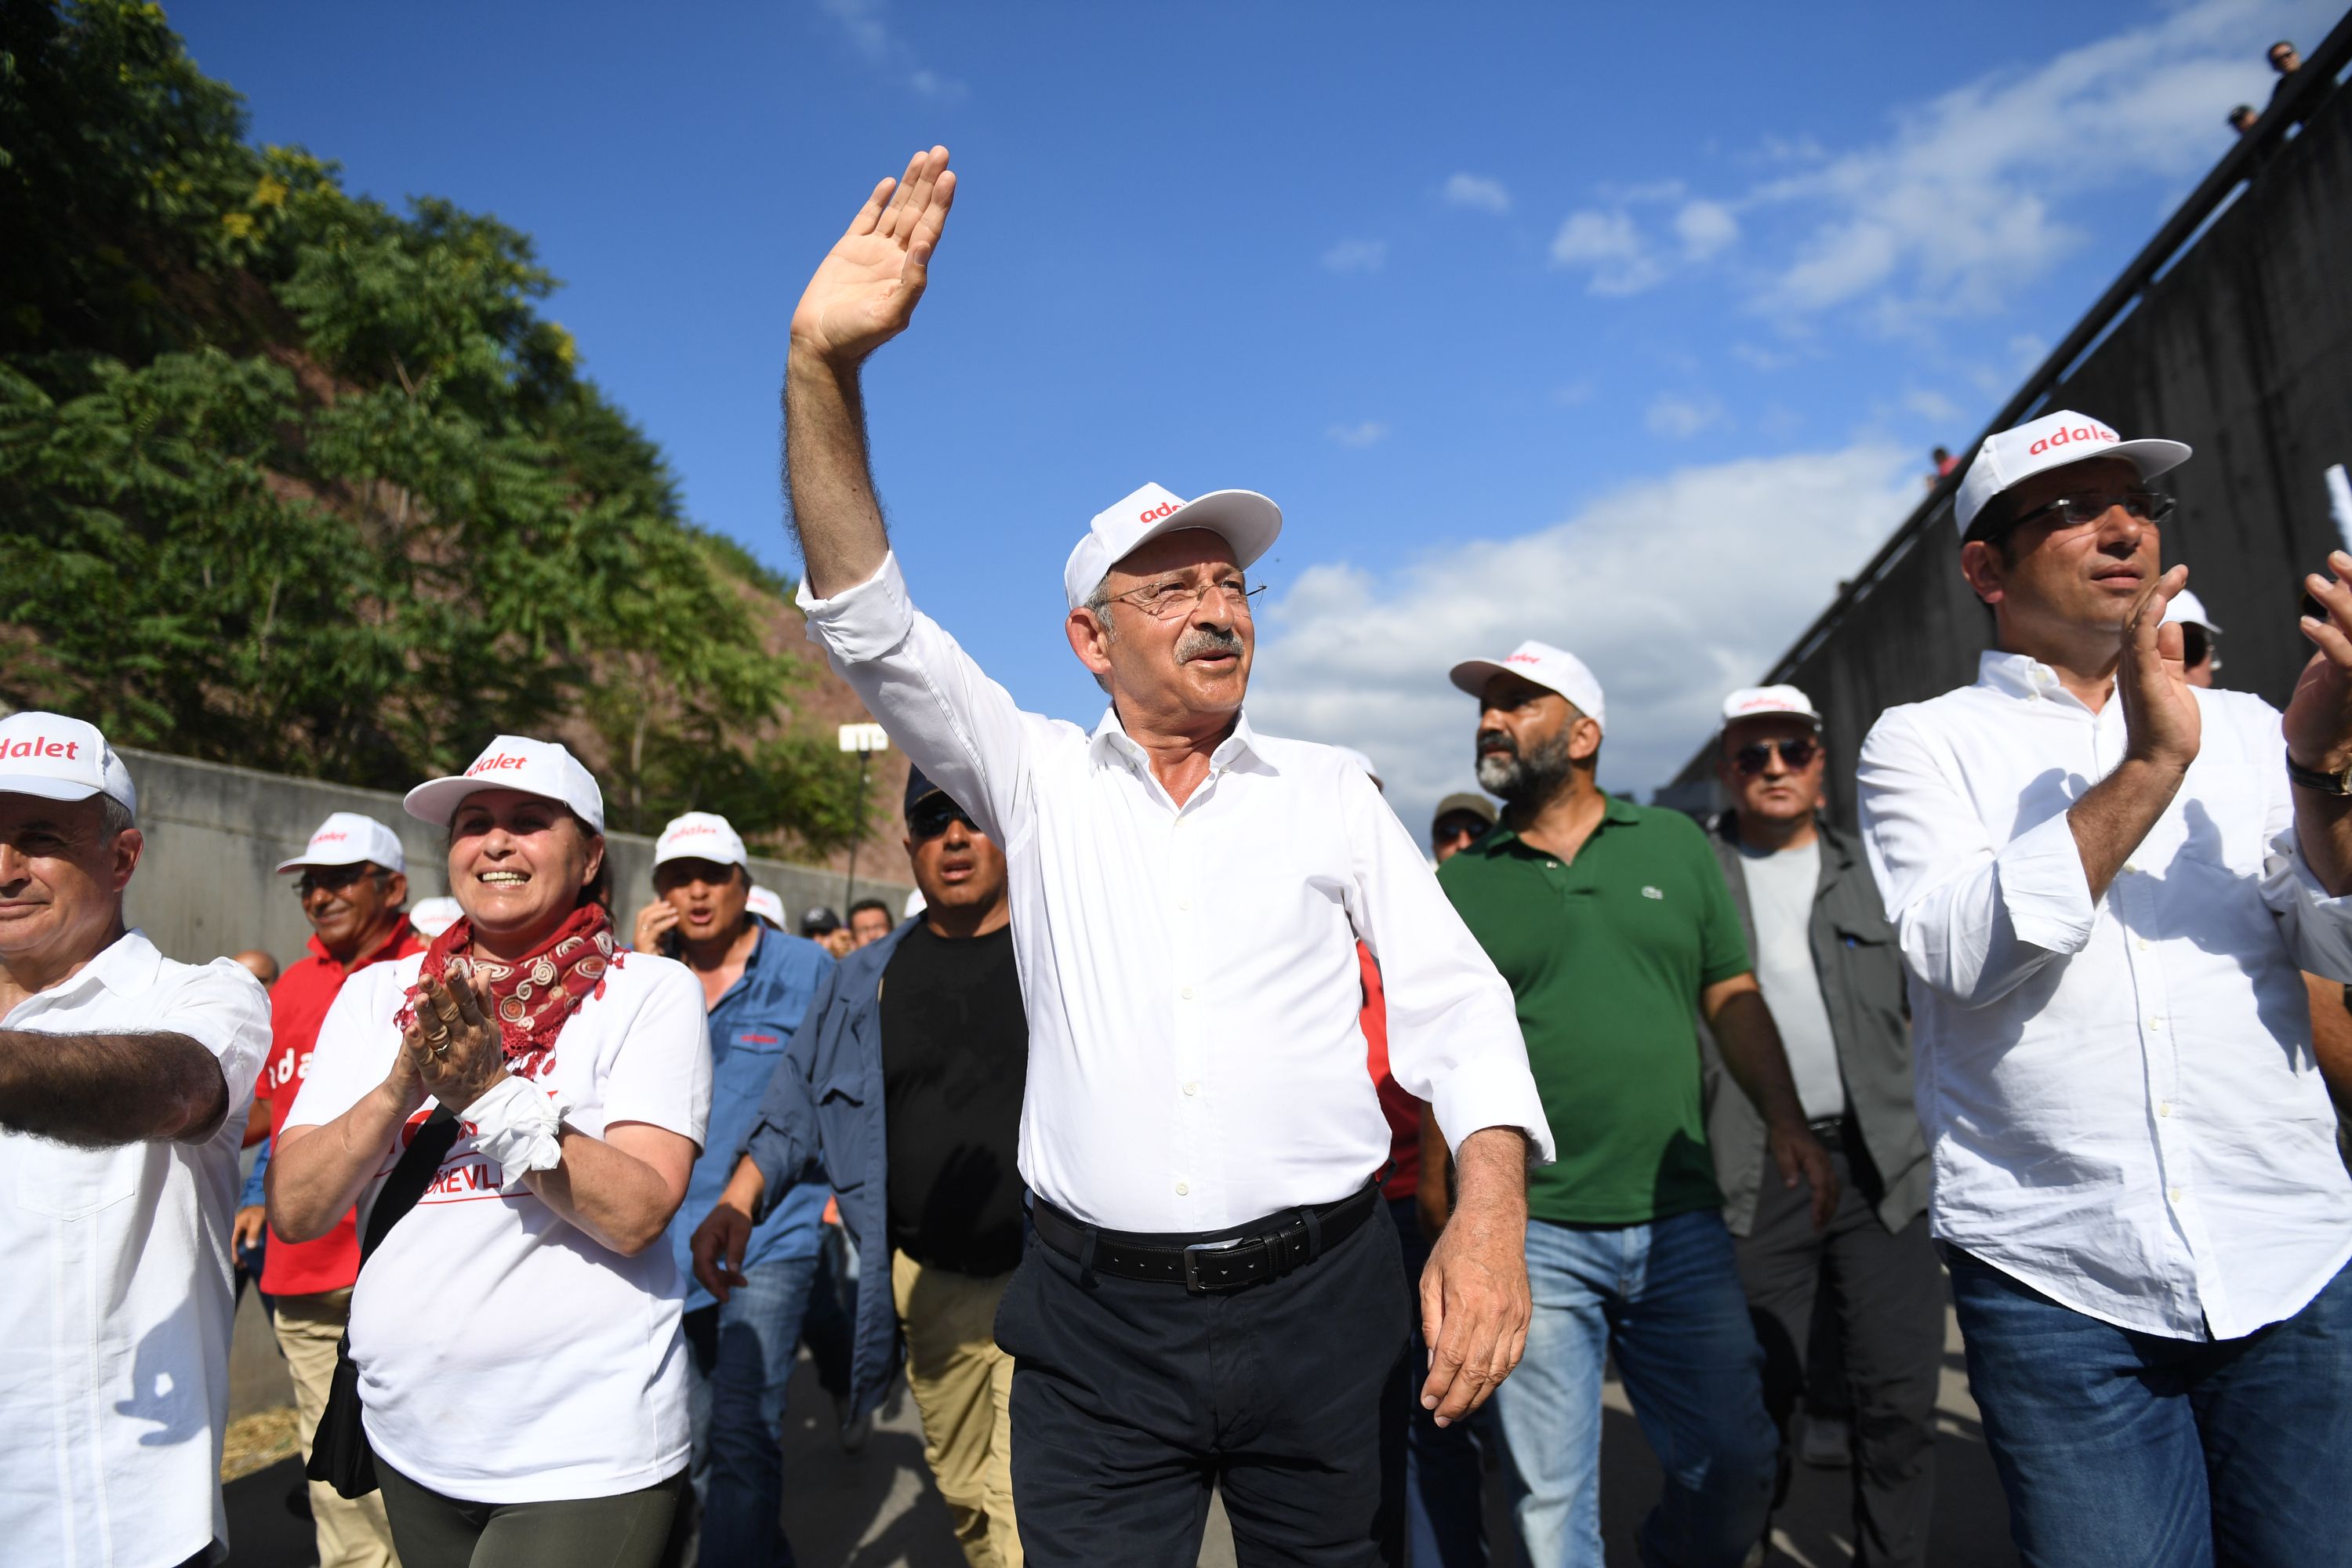 Kemal Kilicdaroglu (C), the leader of Turkey's main opposition Republican People's Party, walks with thousands of supporters on the 21st day march for justice " in Izmit, July 5, 2017 (BULENT KILIC—AFP/Getty Images)